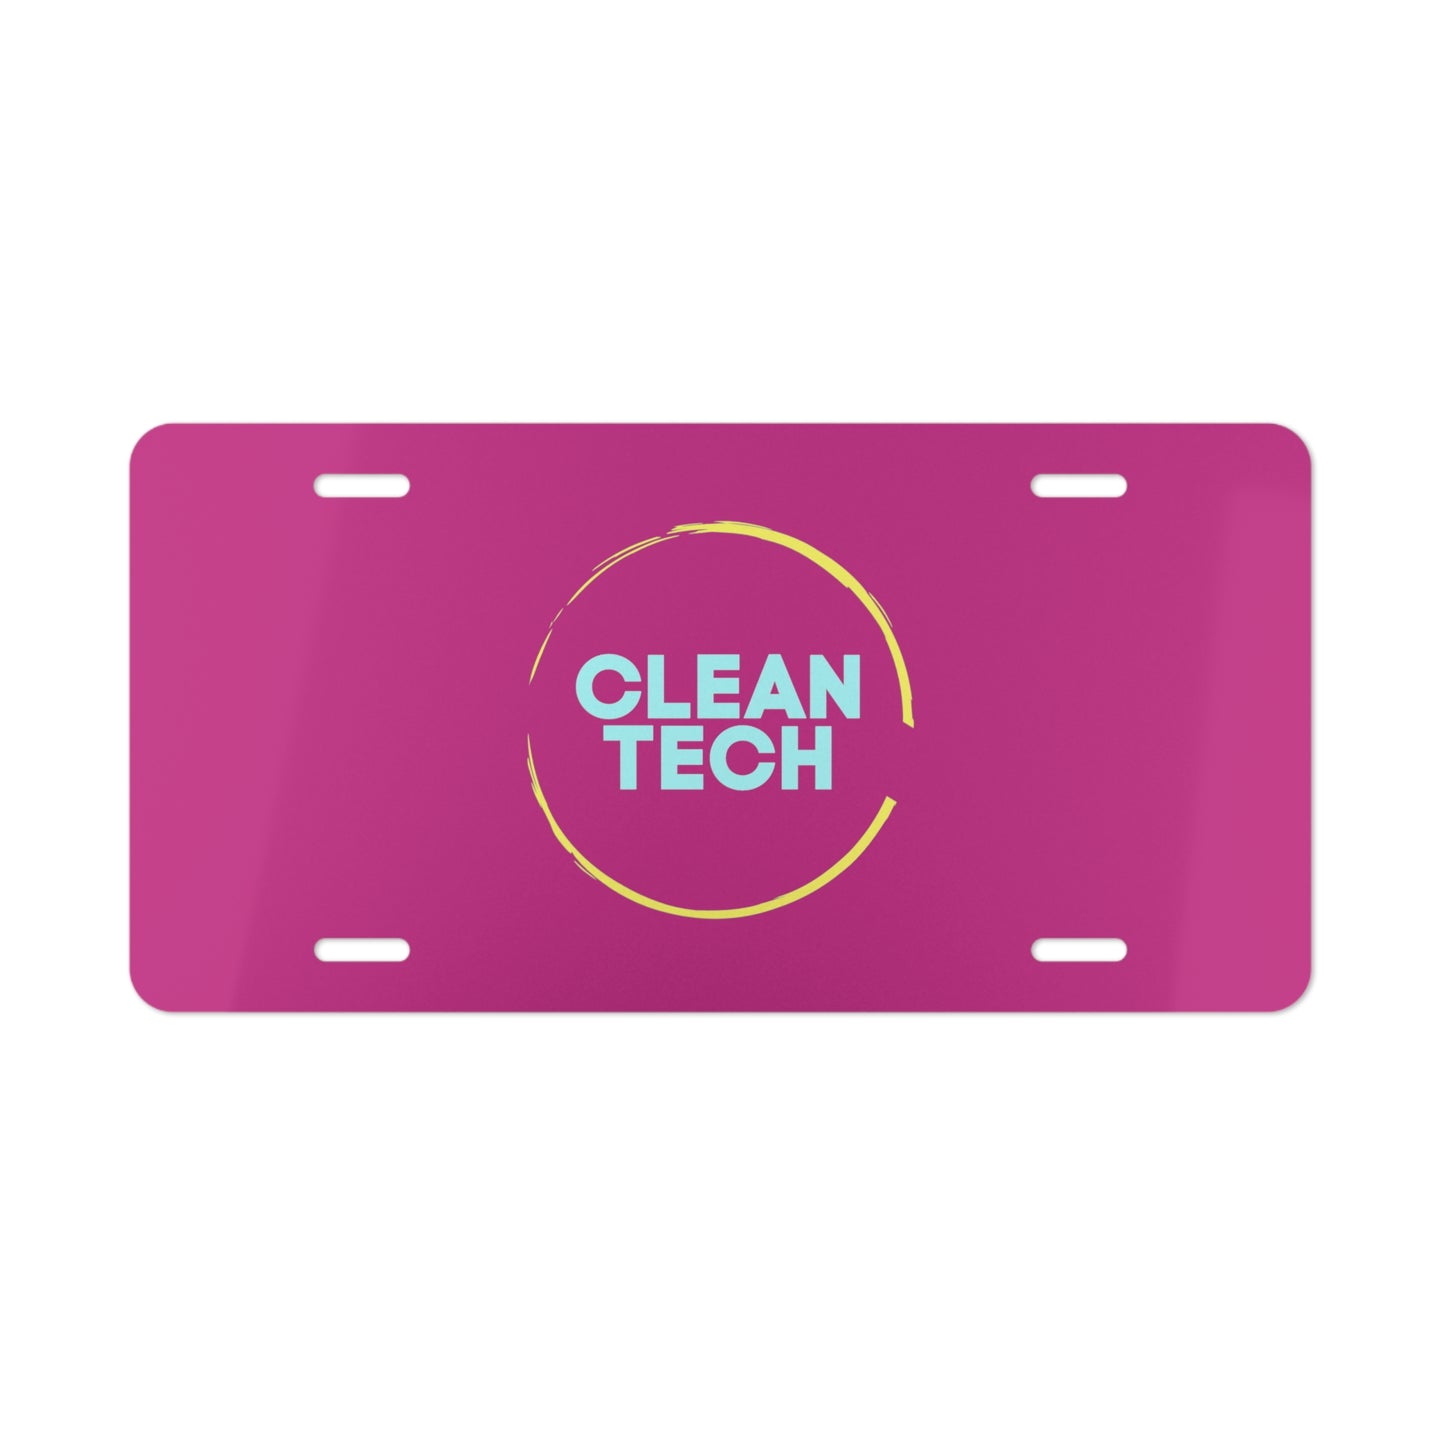 CLEANTECH License Plate, Pink